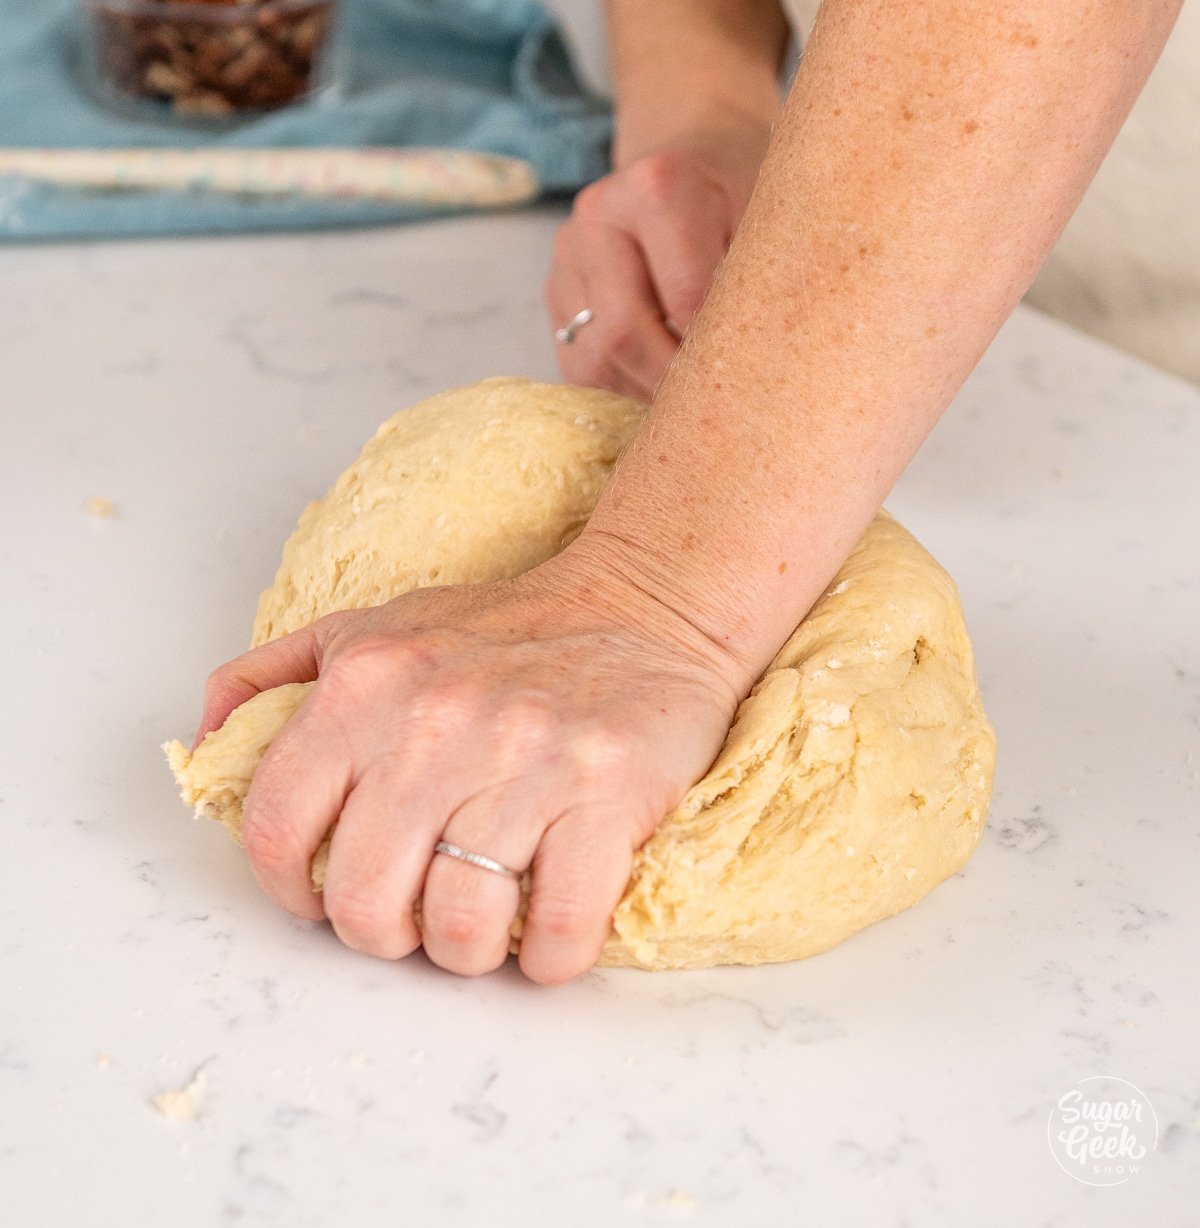 hands pressing down on a ball of dough